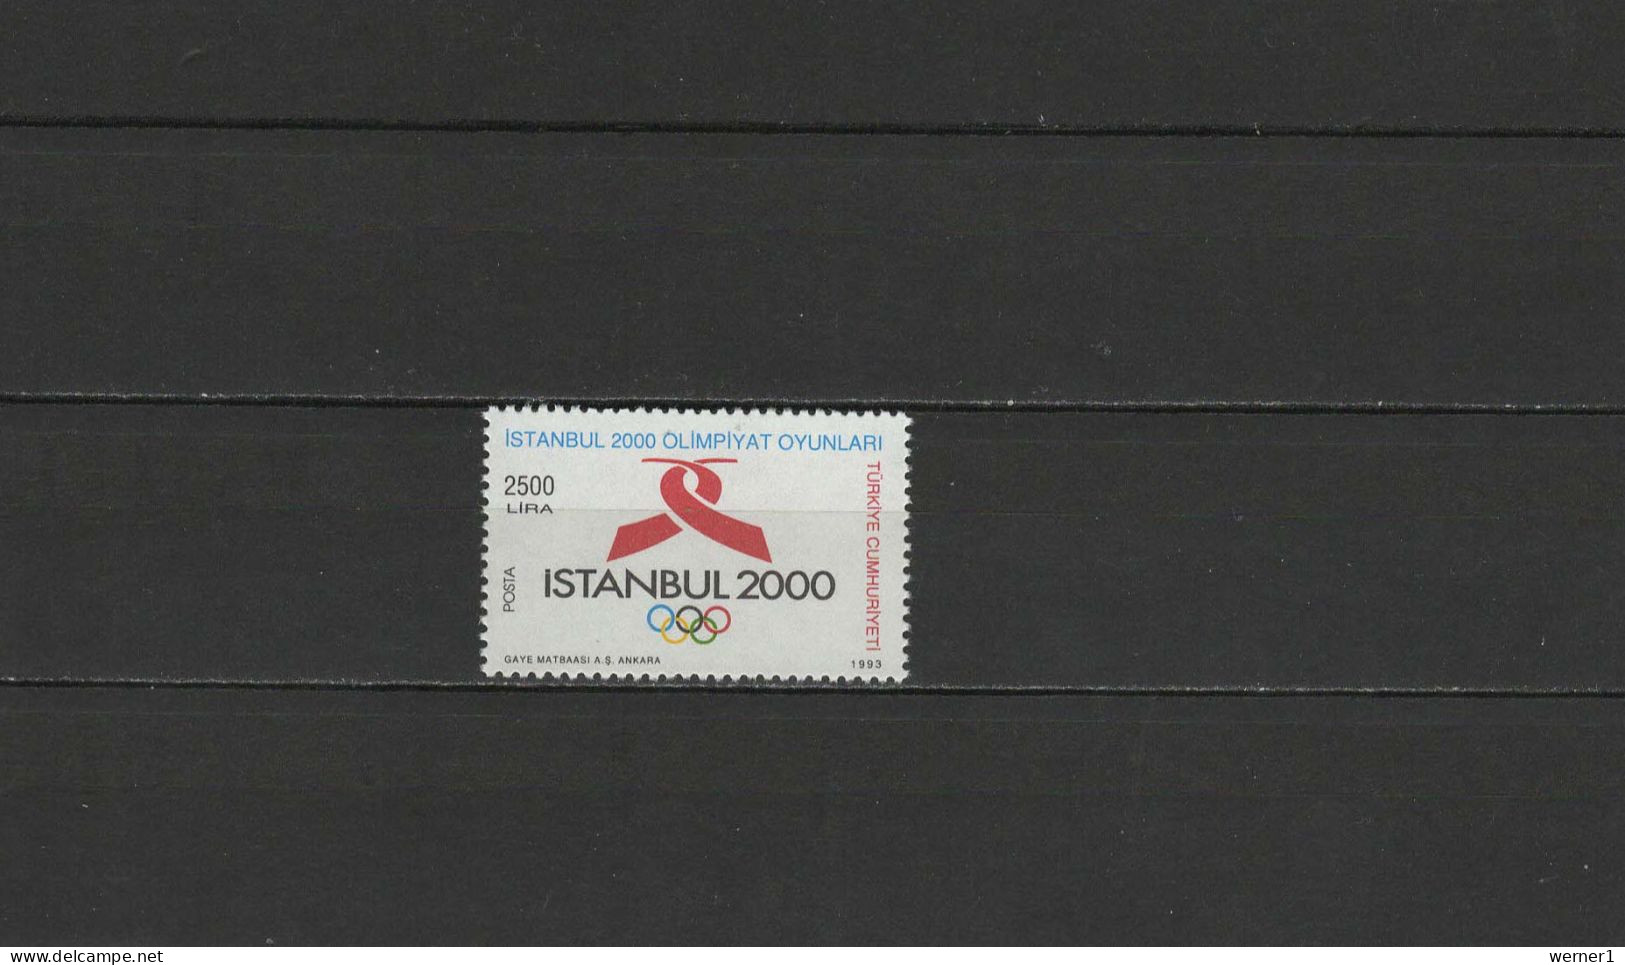 Turkey 1993 Olympic Games Stamp "Istanbul 2000" MNH - Sommer 1992: Barcelone